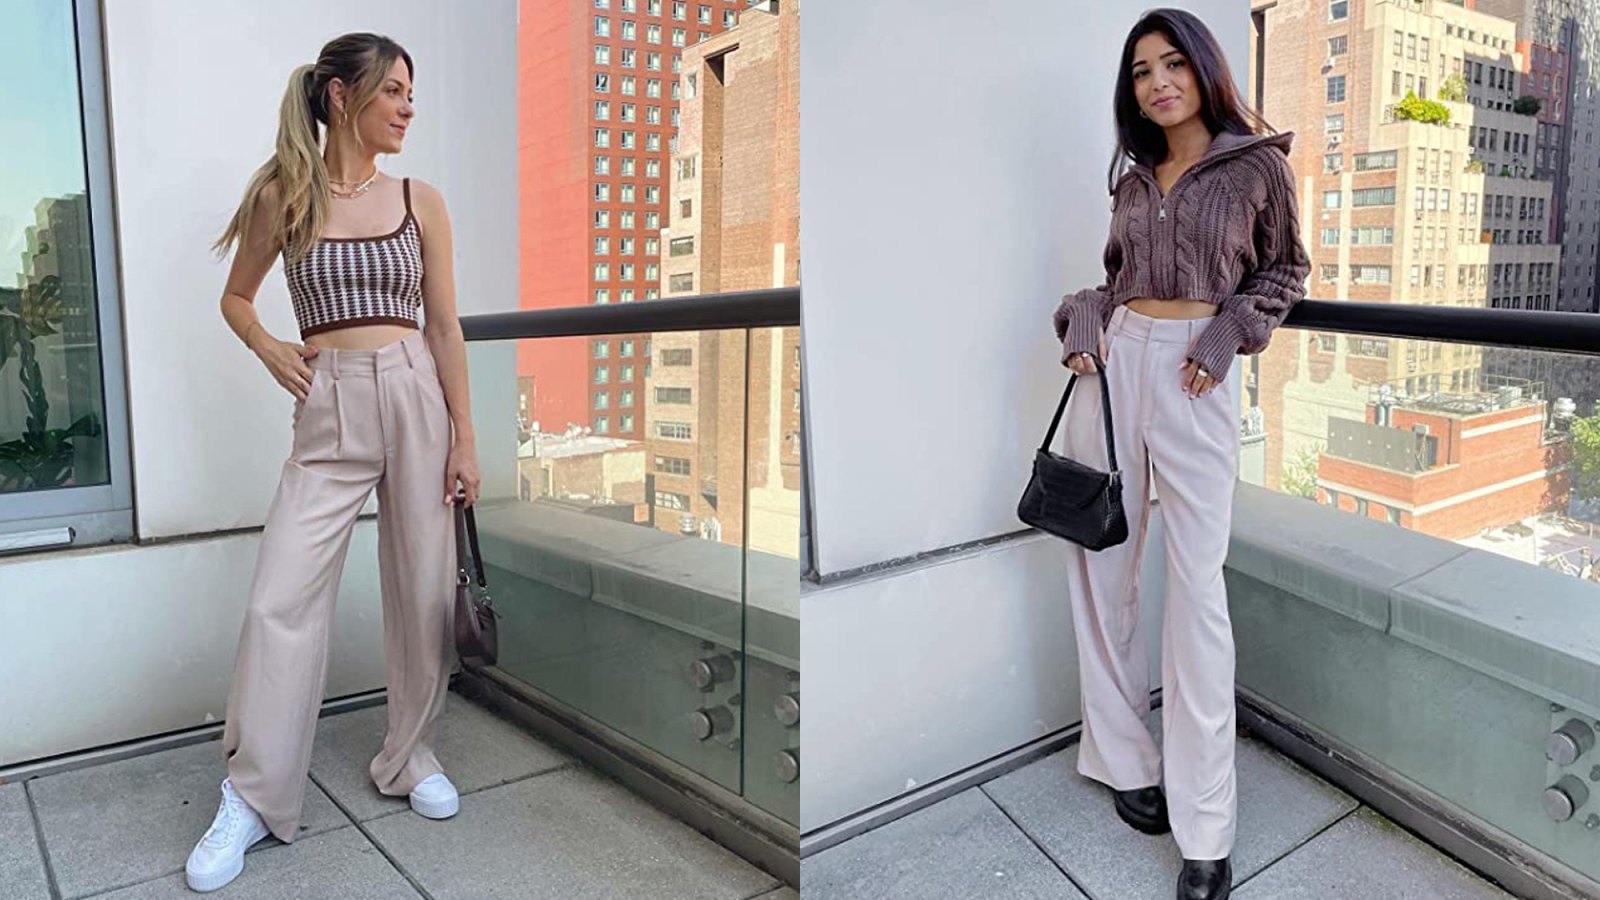 Wide Leg Pants Complete Style Guide For Women 2022  Styling wide leg pants,  Wide leg pants outfit, Stylish outfits casual